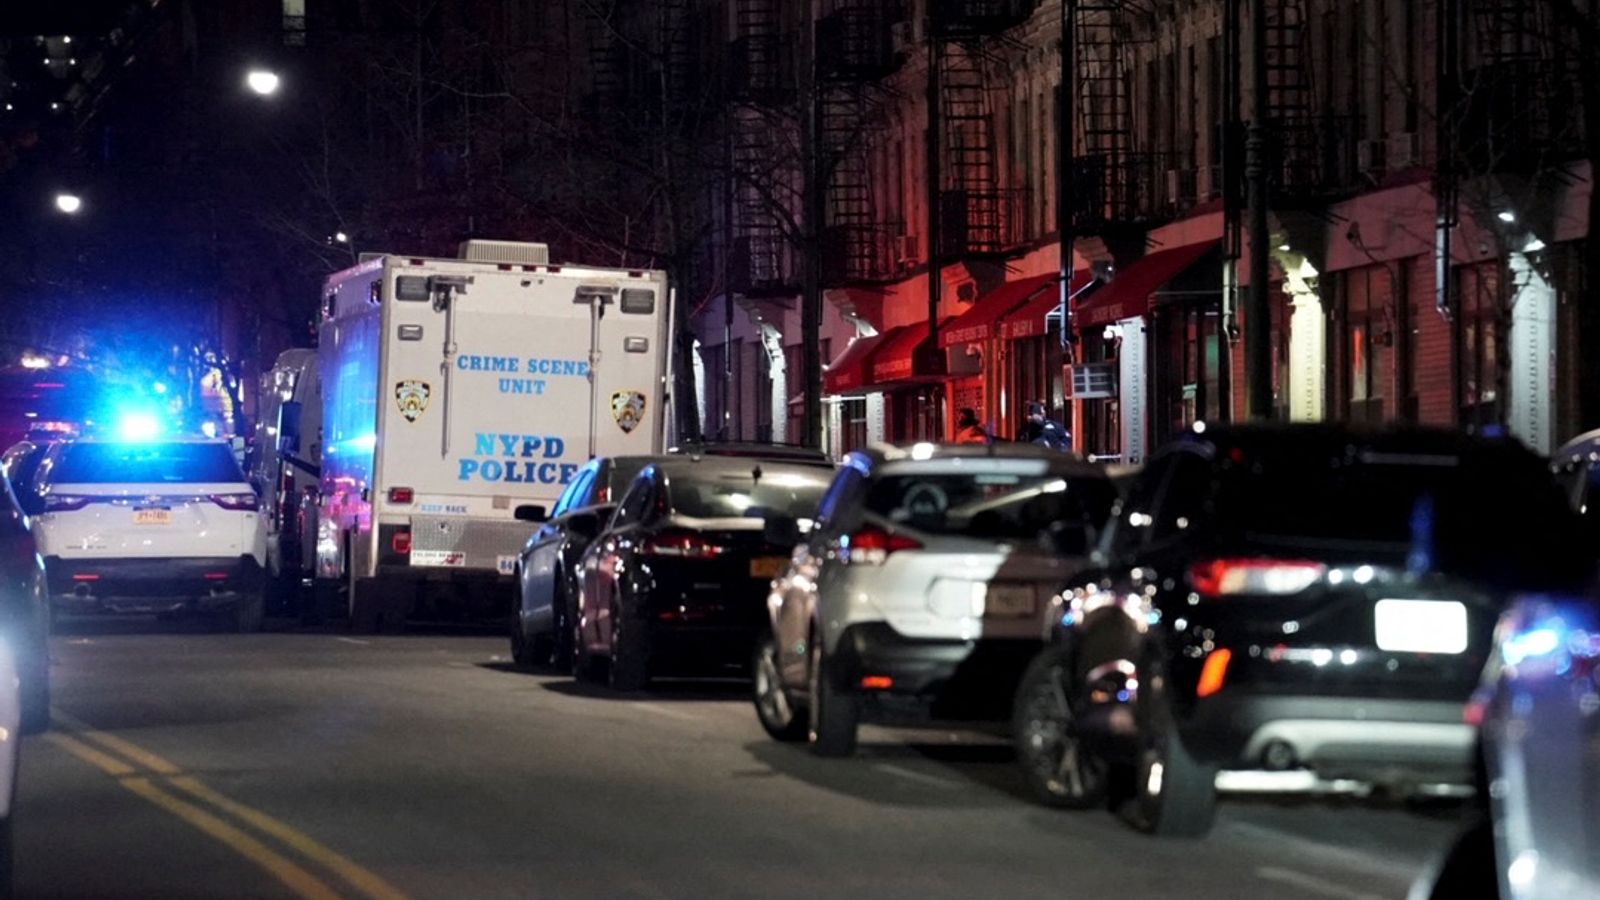 New York shooting: Officer killed in Harlem after responding to ‘domestic’ incident